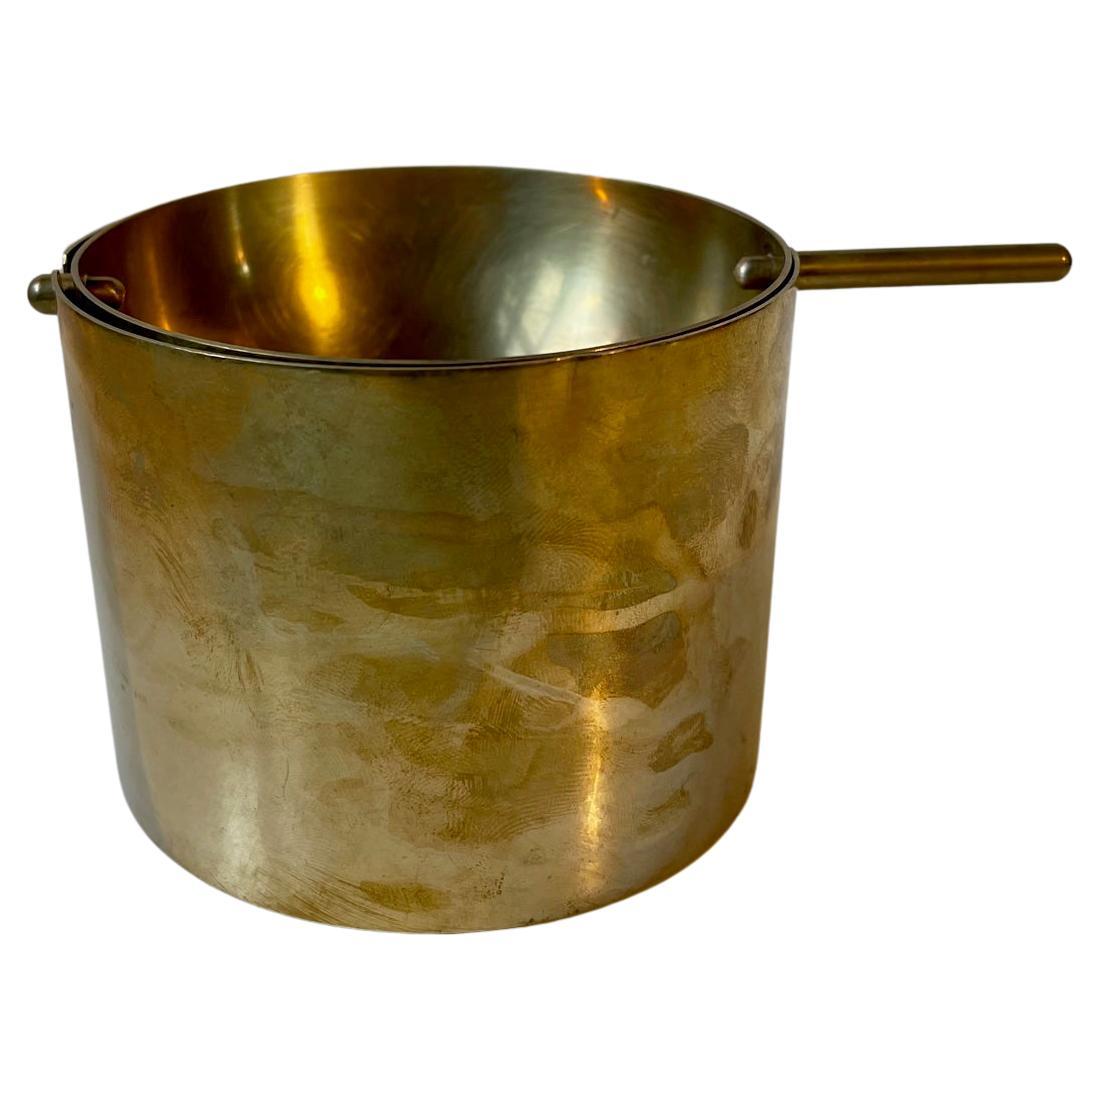 Large Brass Ashtray Cylinda-Line by Arne Jacobsen for Stelton, 1960s For Sale